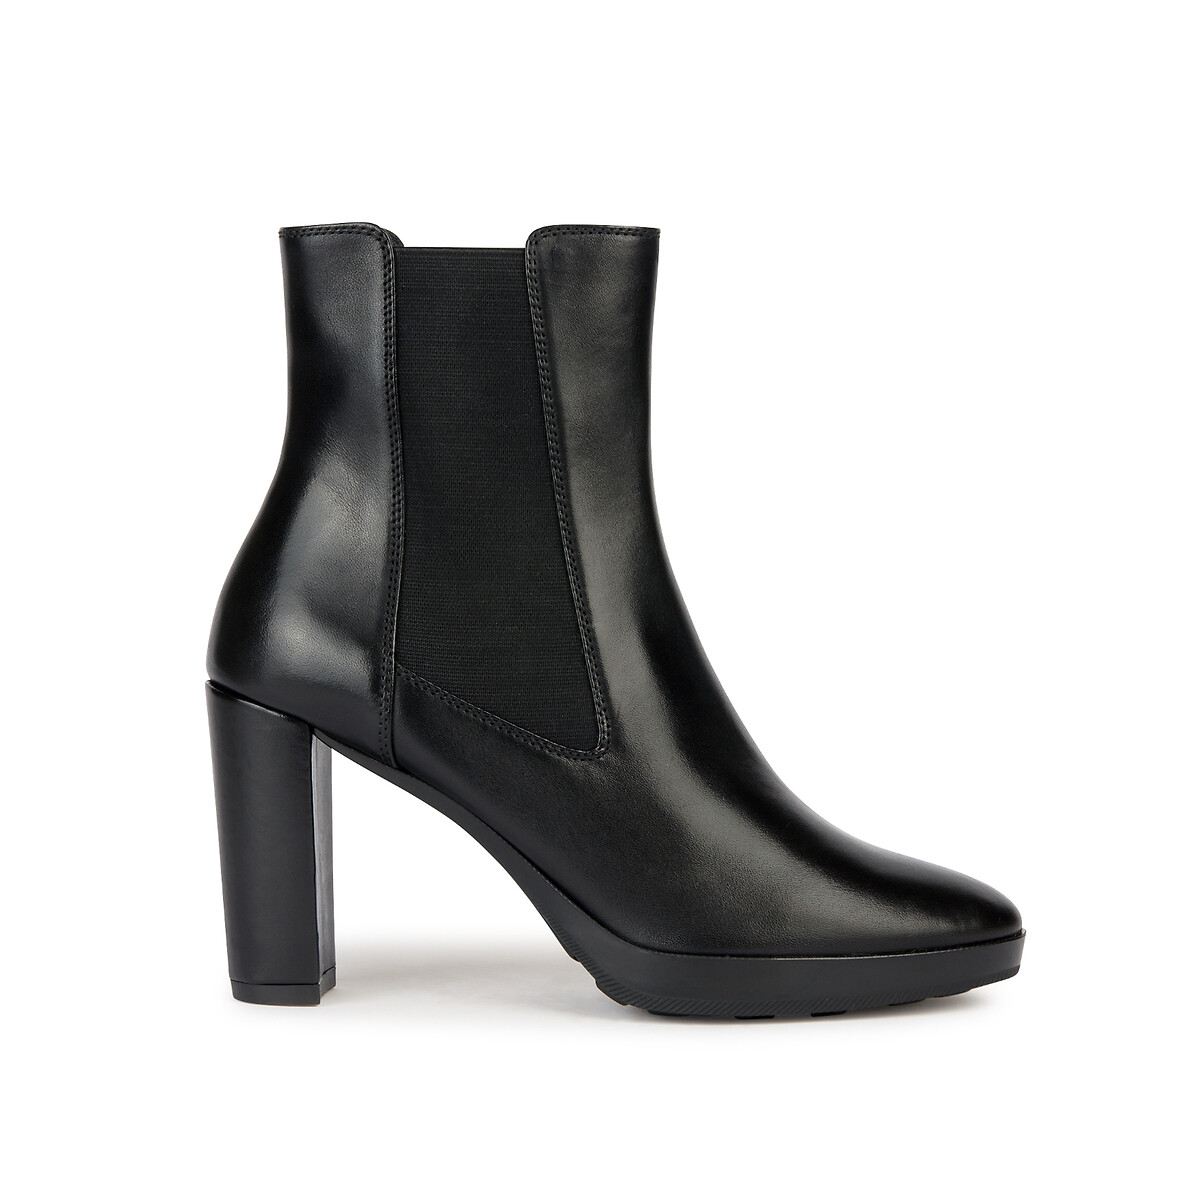 Walk Pleasure Chelsea Boots in Leather with High Heels